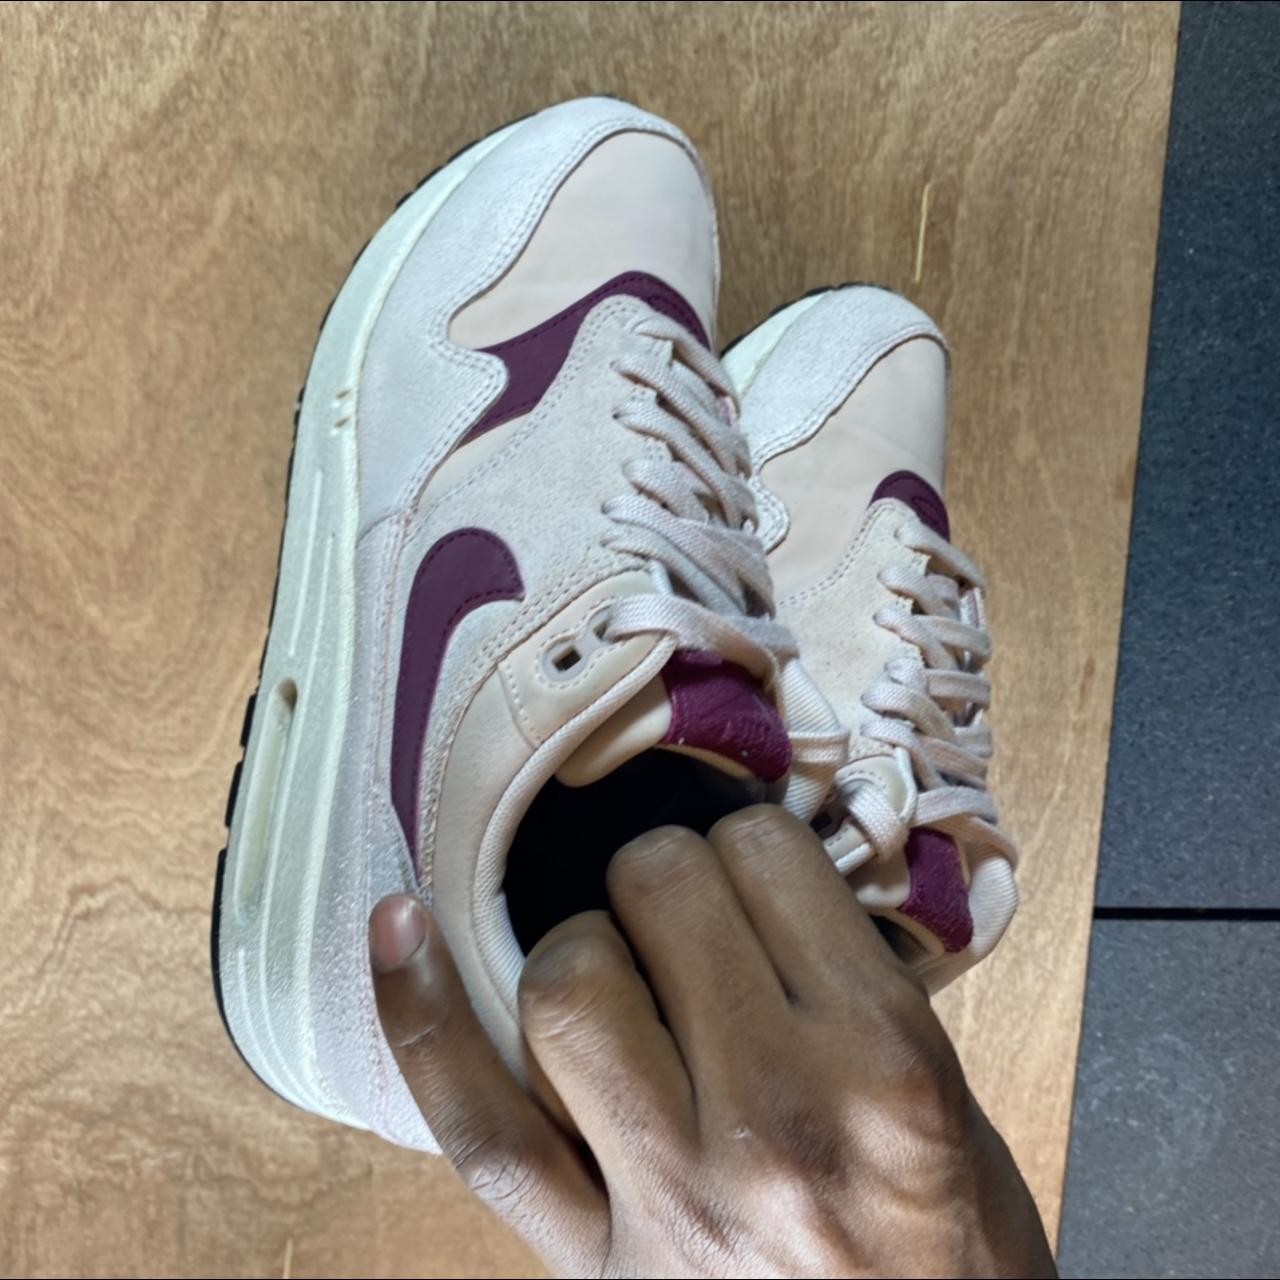 Nike Air Max 1 Barely Rose True Berry (Women's)